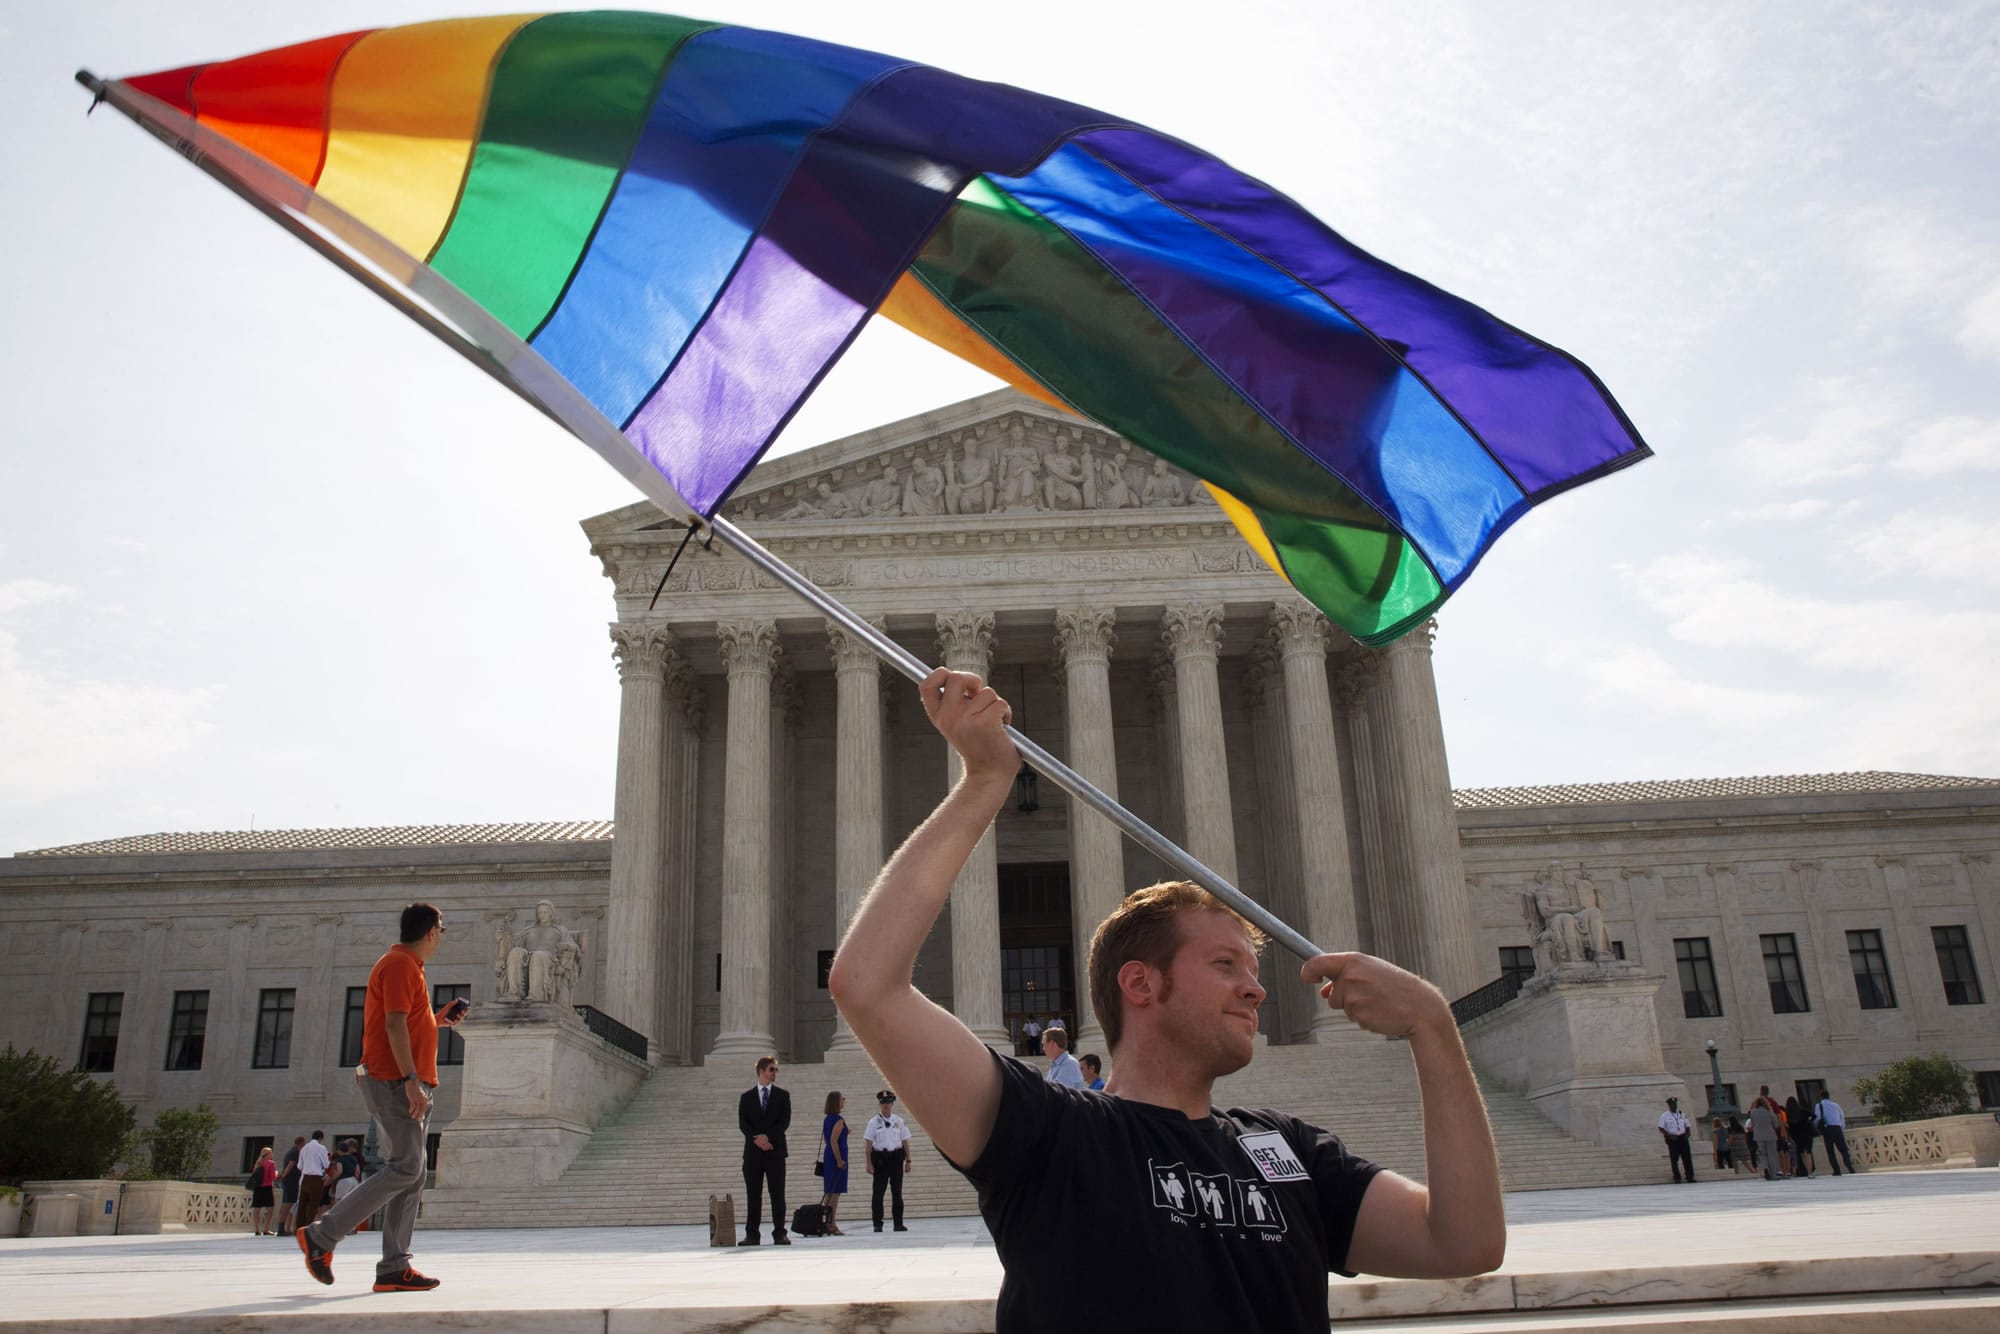 FILE - In a  June 25, 2015 file photo, John Becker, 30, of Silver Spring, Md., waves a rainbow flag in support of gay marriage outside of the Supreme Court in Washington. LGBT advocates are questioning the Trump administration’s quiet deletion of questions on sexuality from two federal surveys.